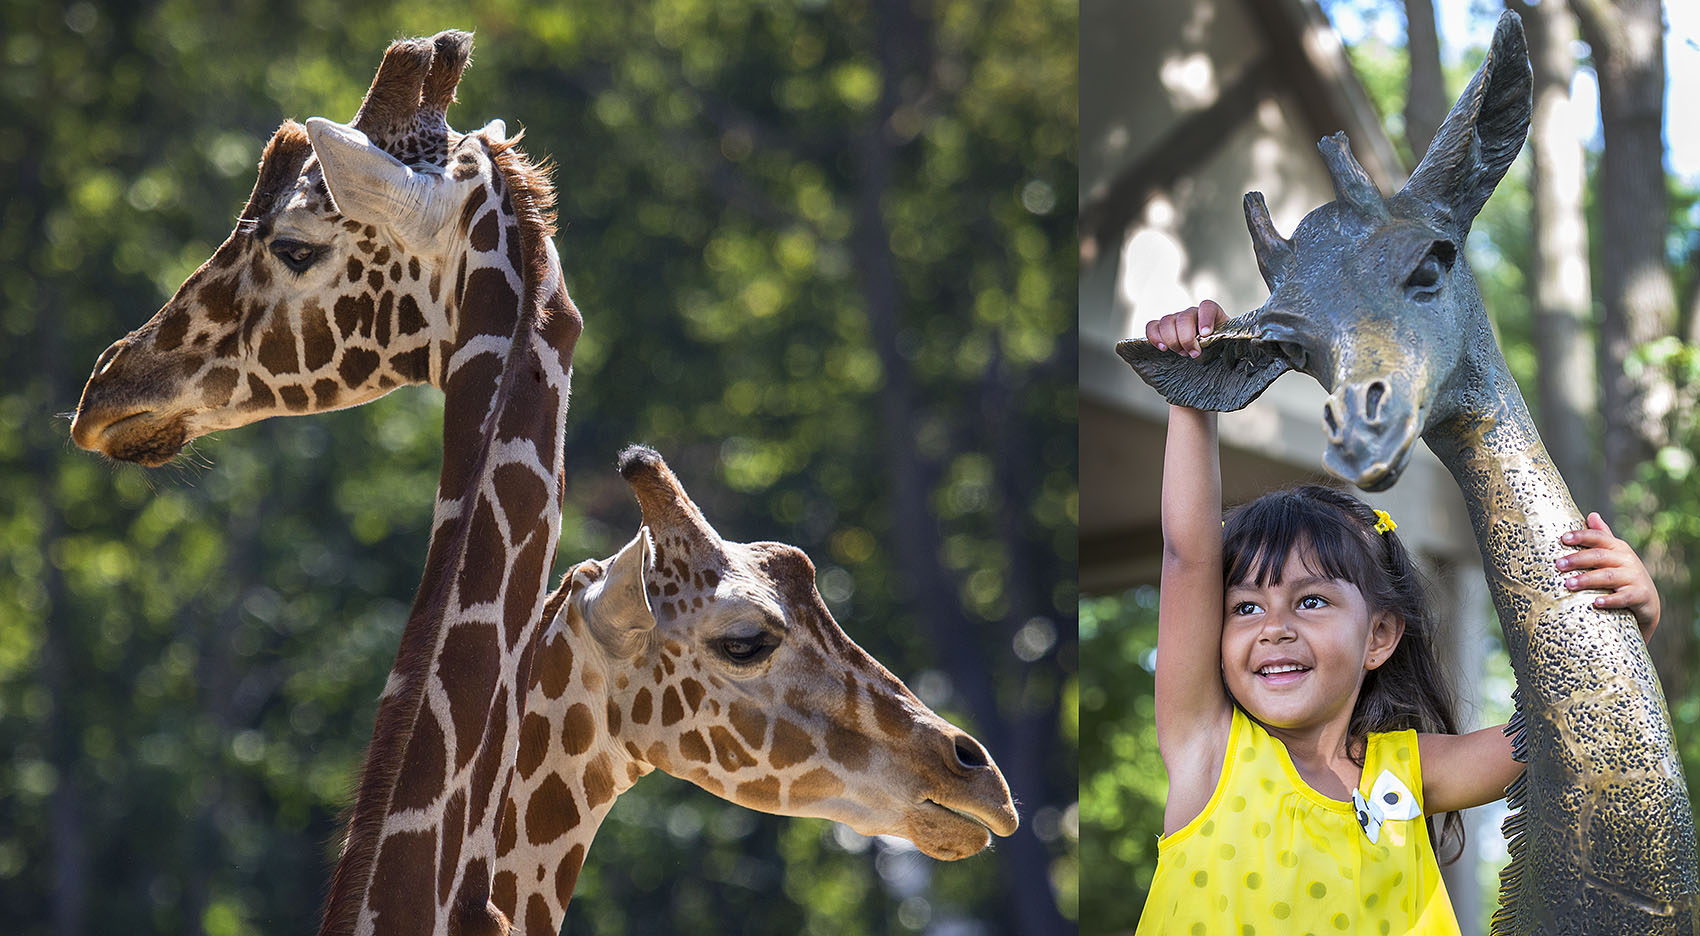 UNMC Ortho patient enjoys day at Omaha Zoo by Scott Dobry Pictures photographer in Omaha, Nebraska